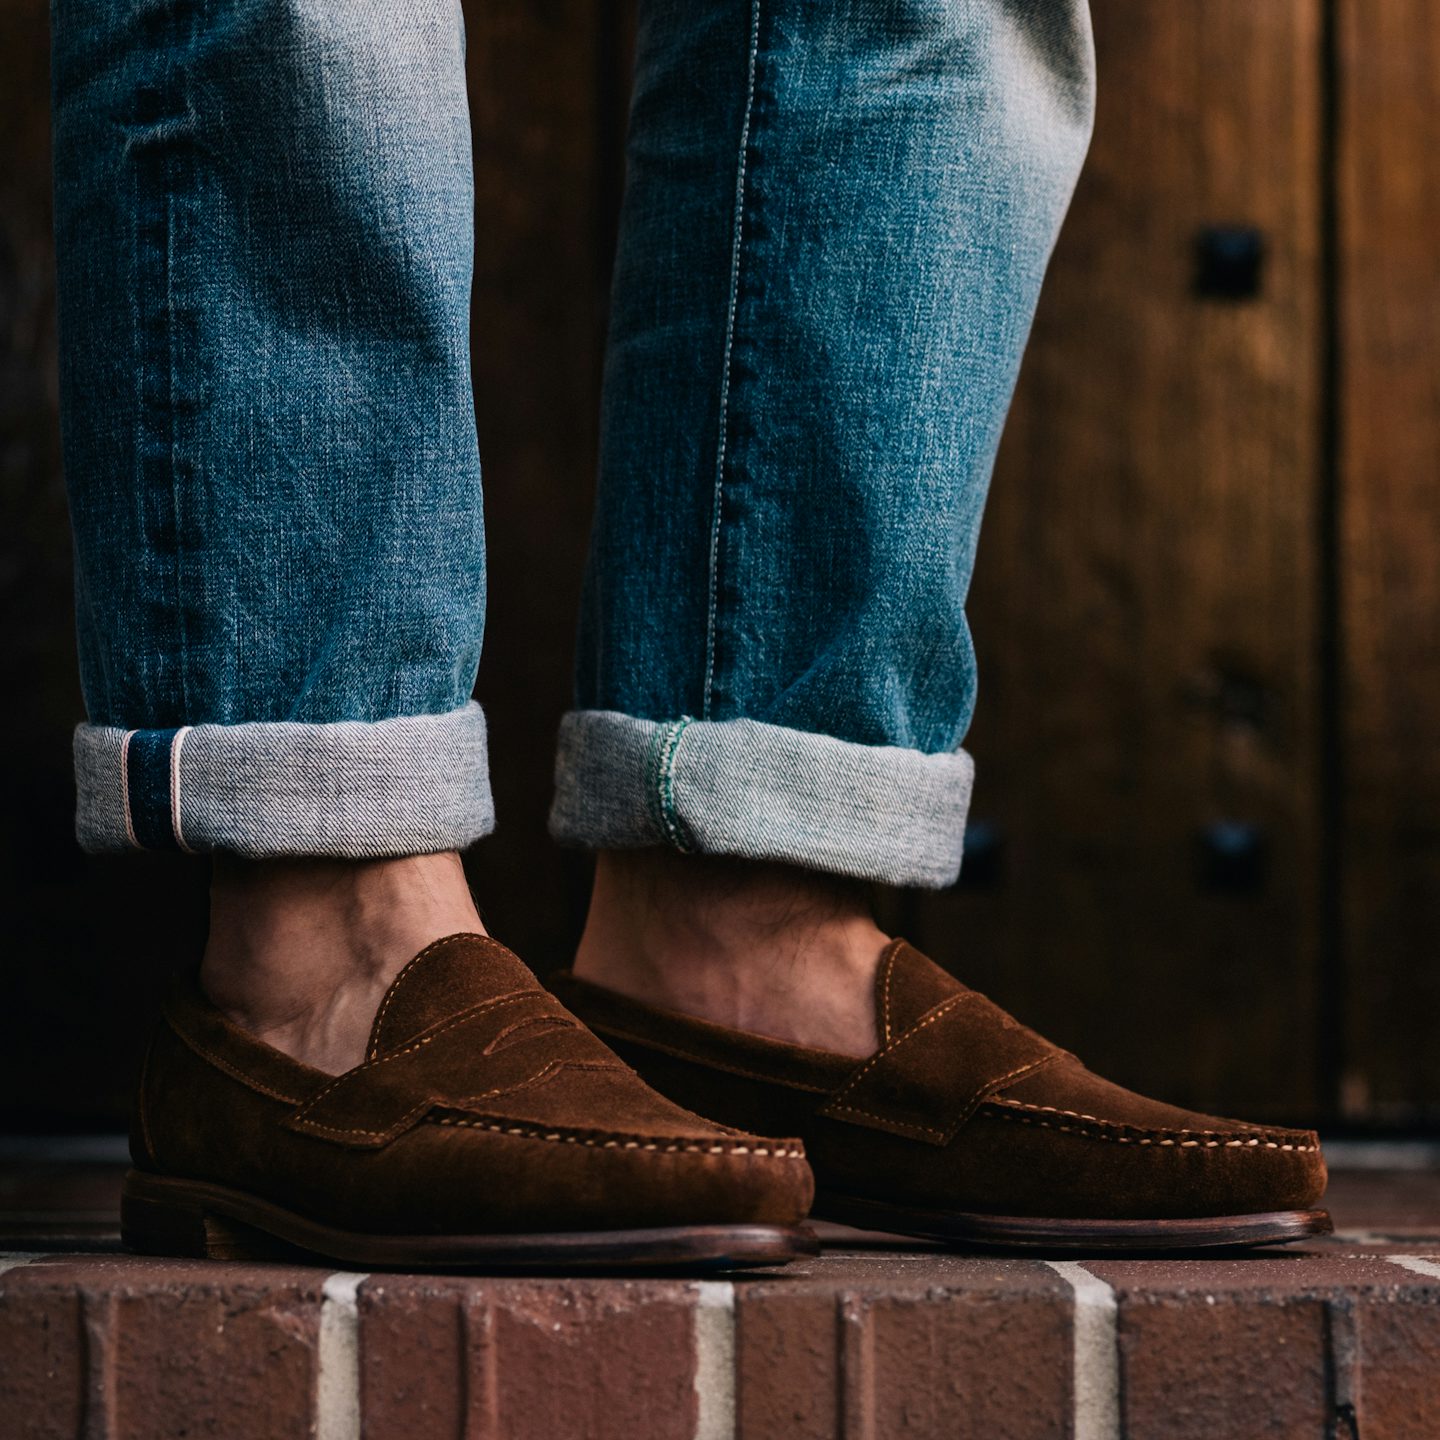 Penny Loafer - Snuff Repello Suede, Leather Sole with Dovetail